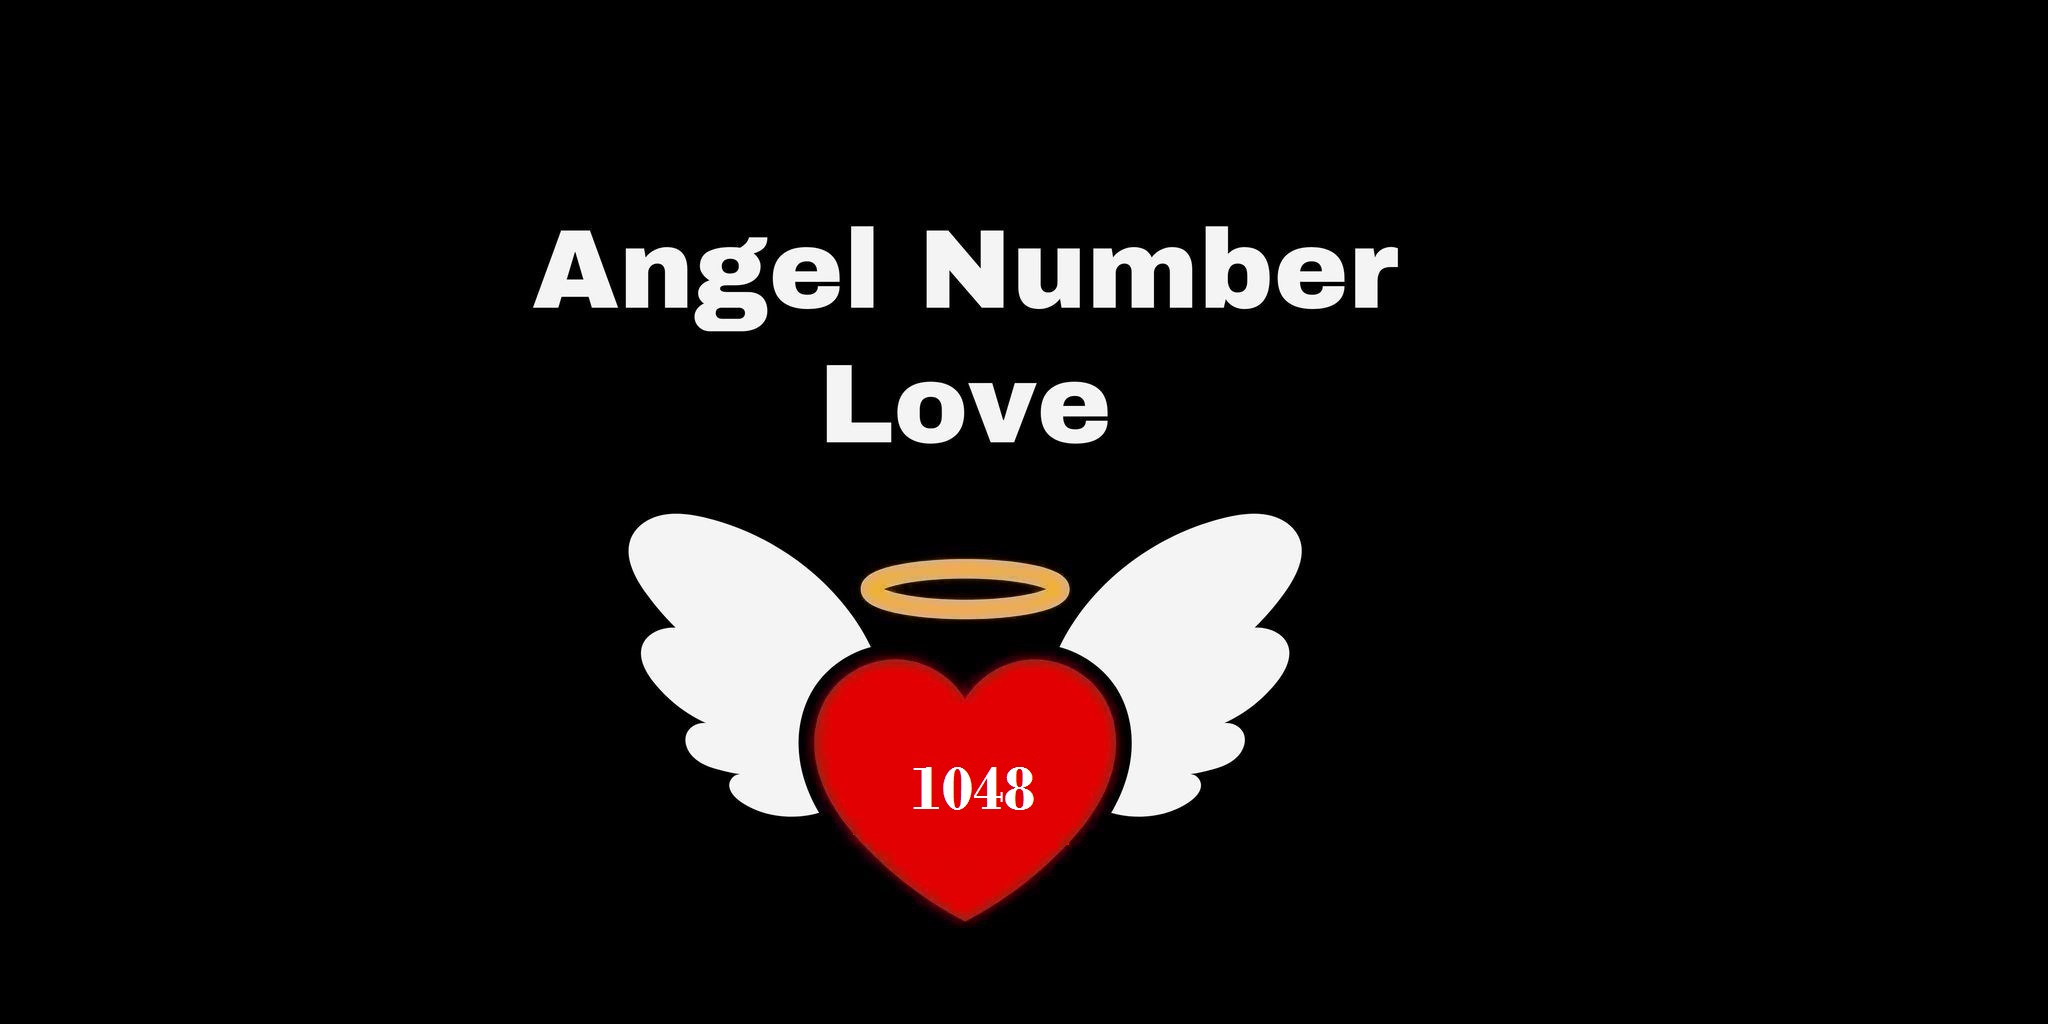 1048 Angel Number Meaning In Love